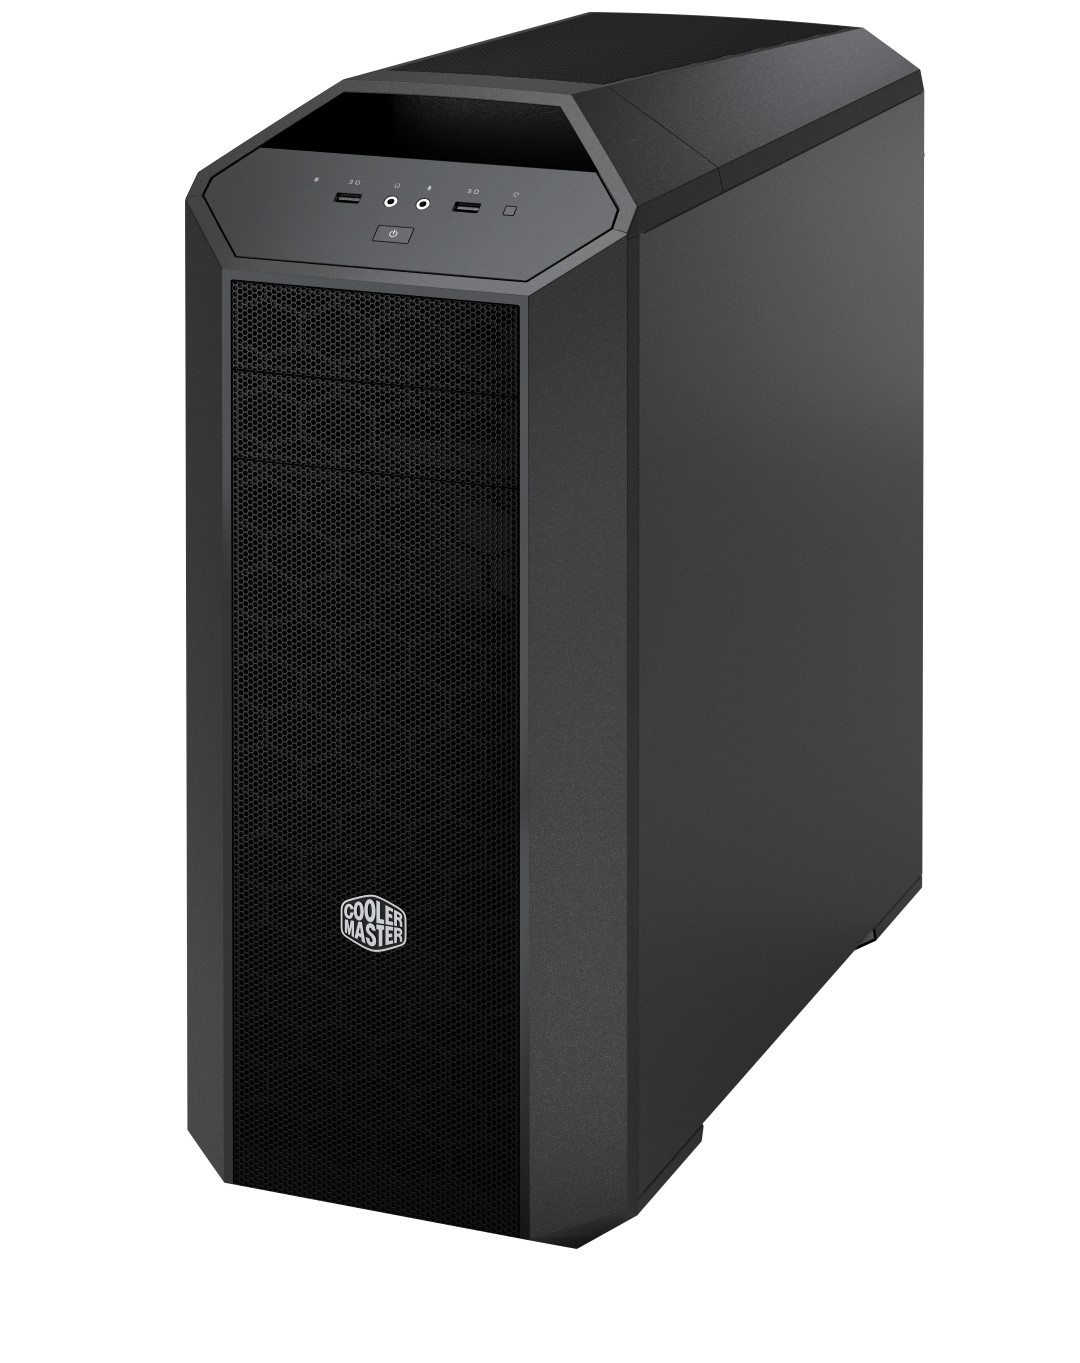 Cooler Master MasterCase 5 available on this 20th August 30